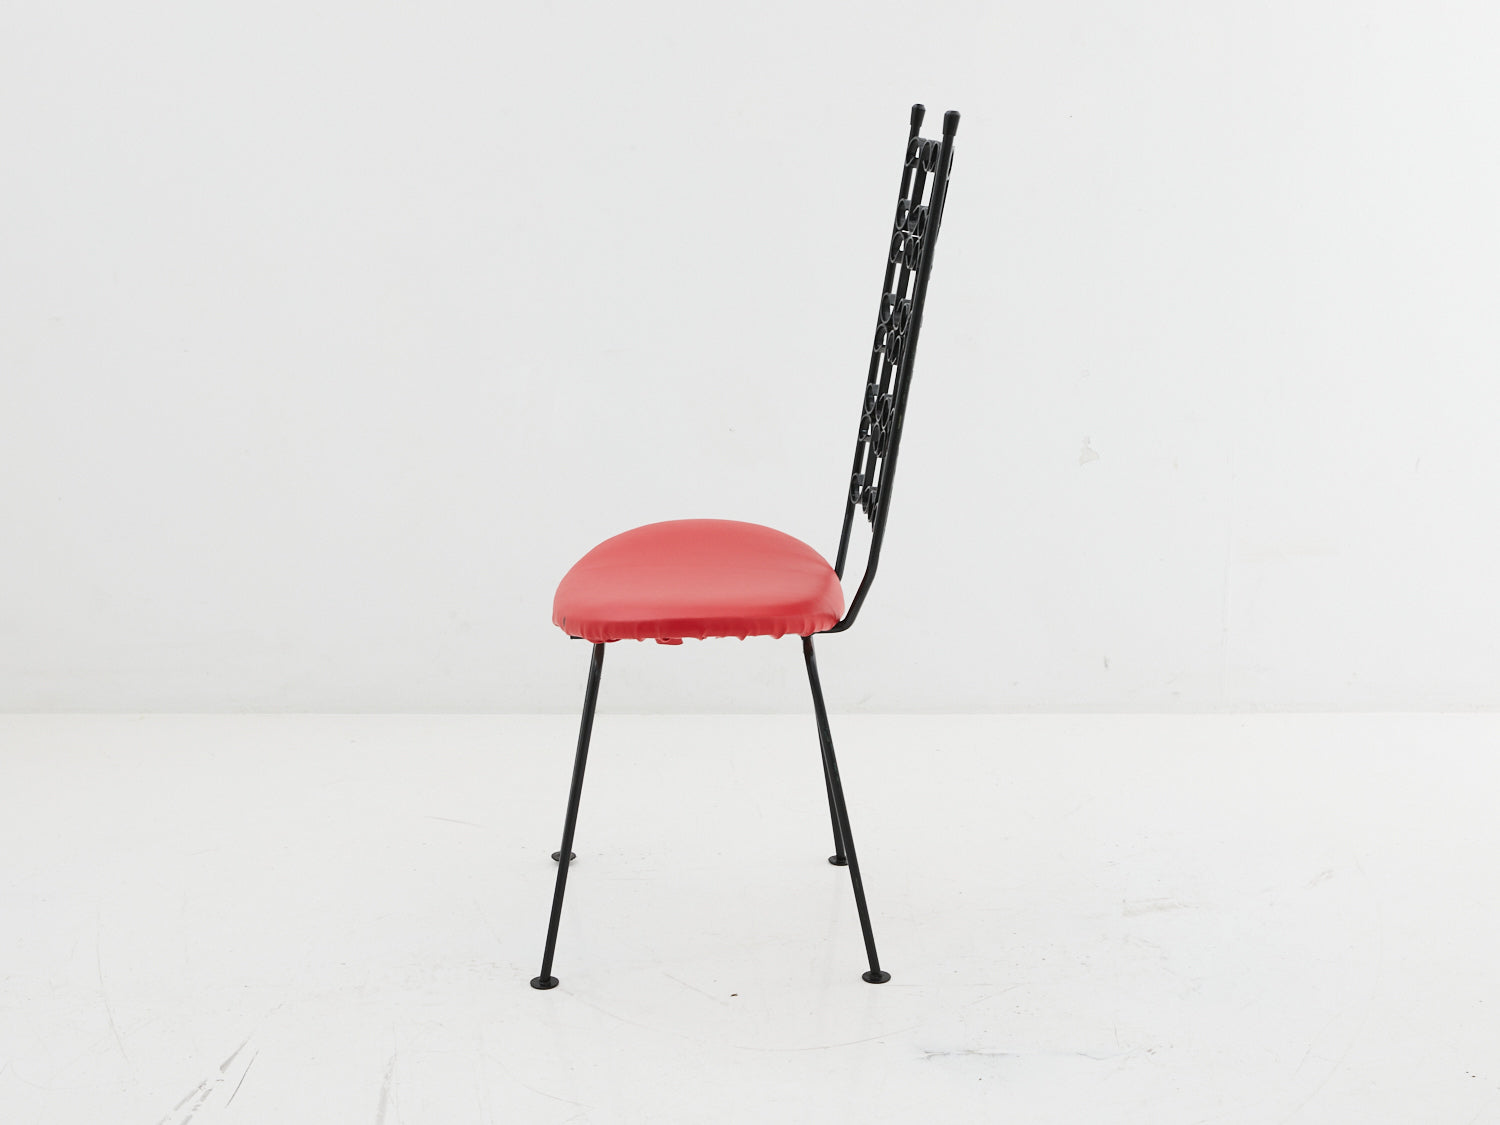 Side view of an iron scroll dining chair with red seat cushion designed by Arthur Umanoff circa 1960s